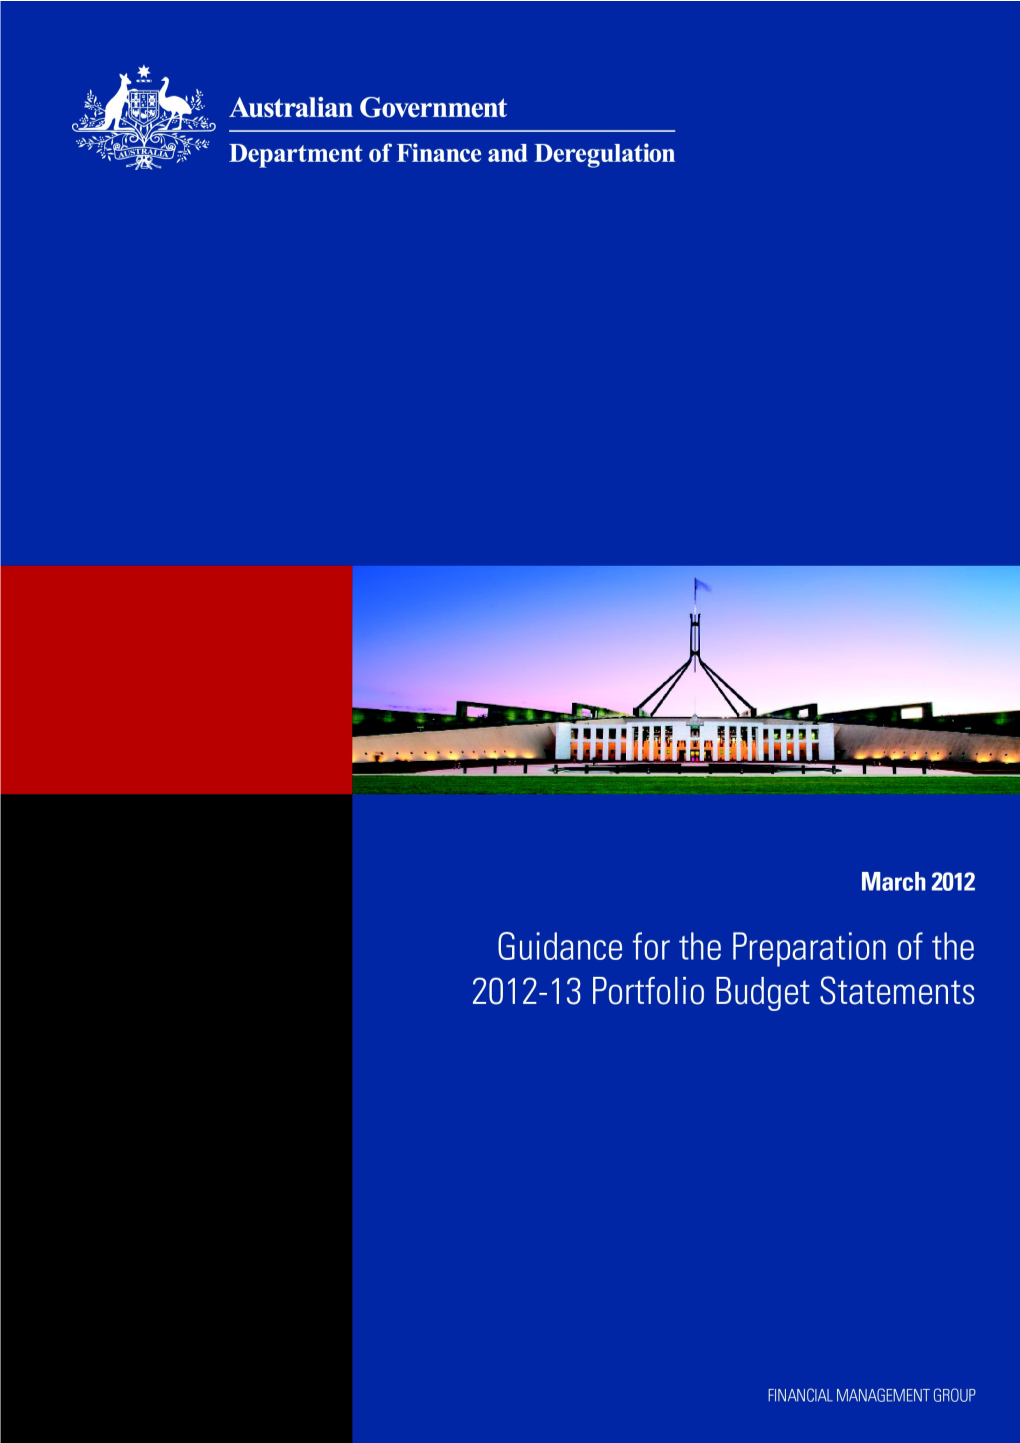 Guidance for the Preparation of the 2012-13 Portfolio Budget Statements